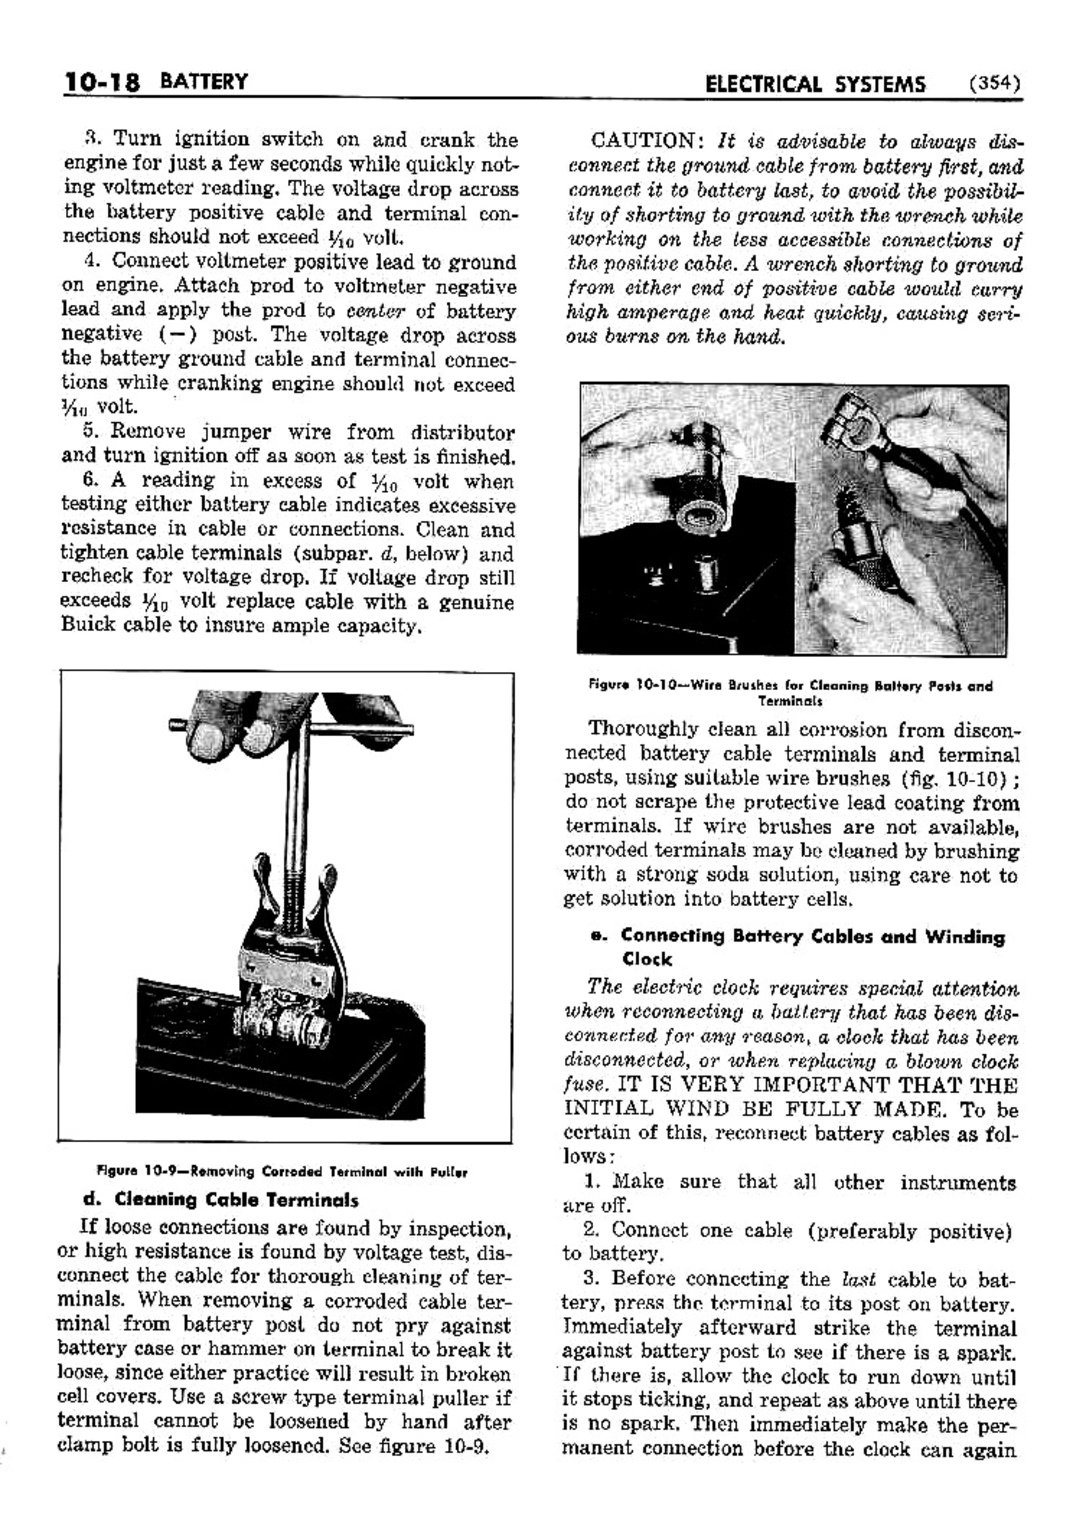 n_11 1952 Buick Shop Manual - Electrical Systems-018-018.jpg